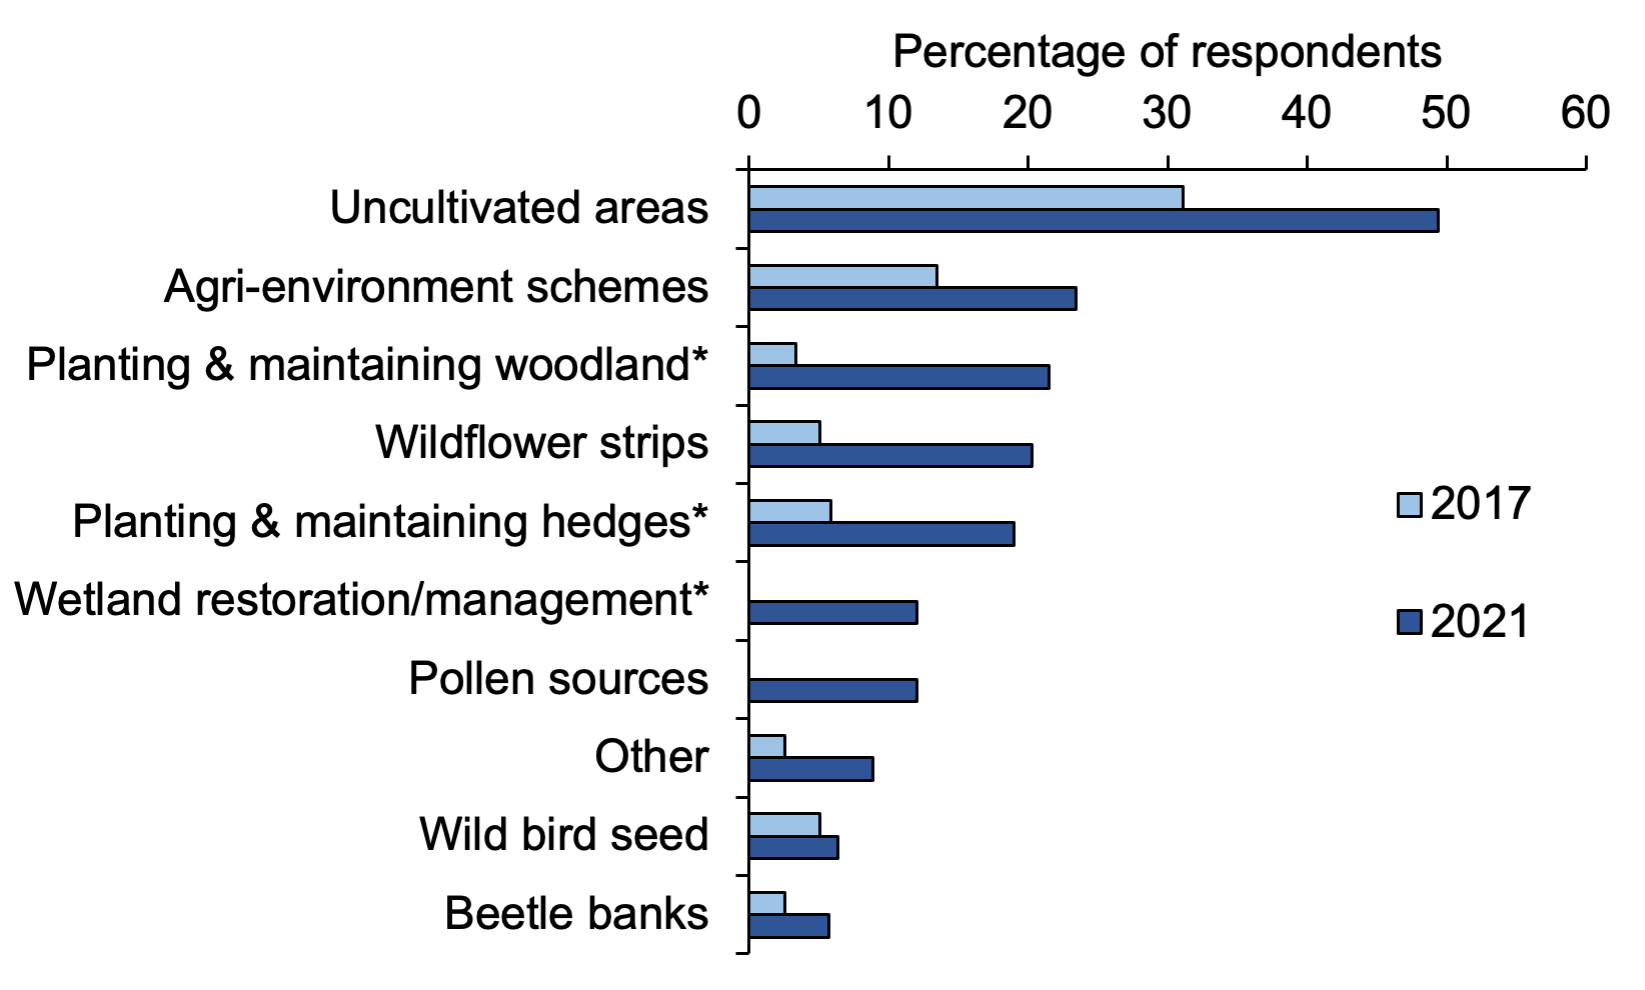 IPM: Bar chart of percentage responses to questions about protecting beneficial organisms where using uncultivated areas is most common method in 2021.